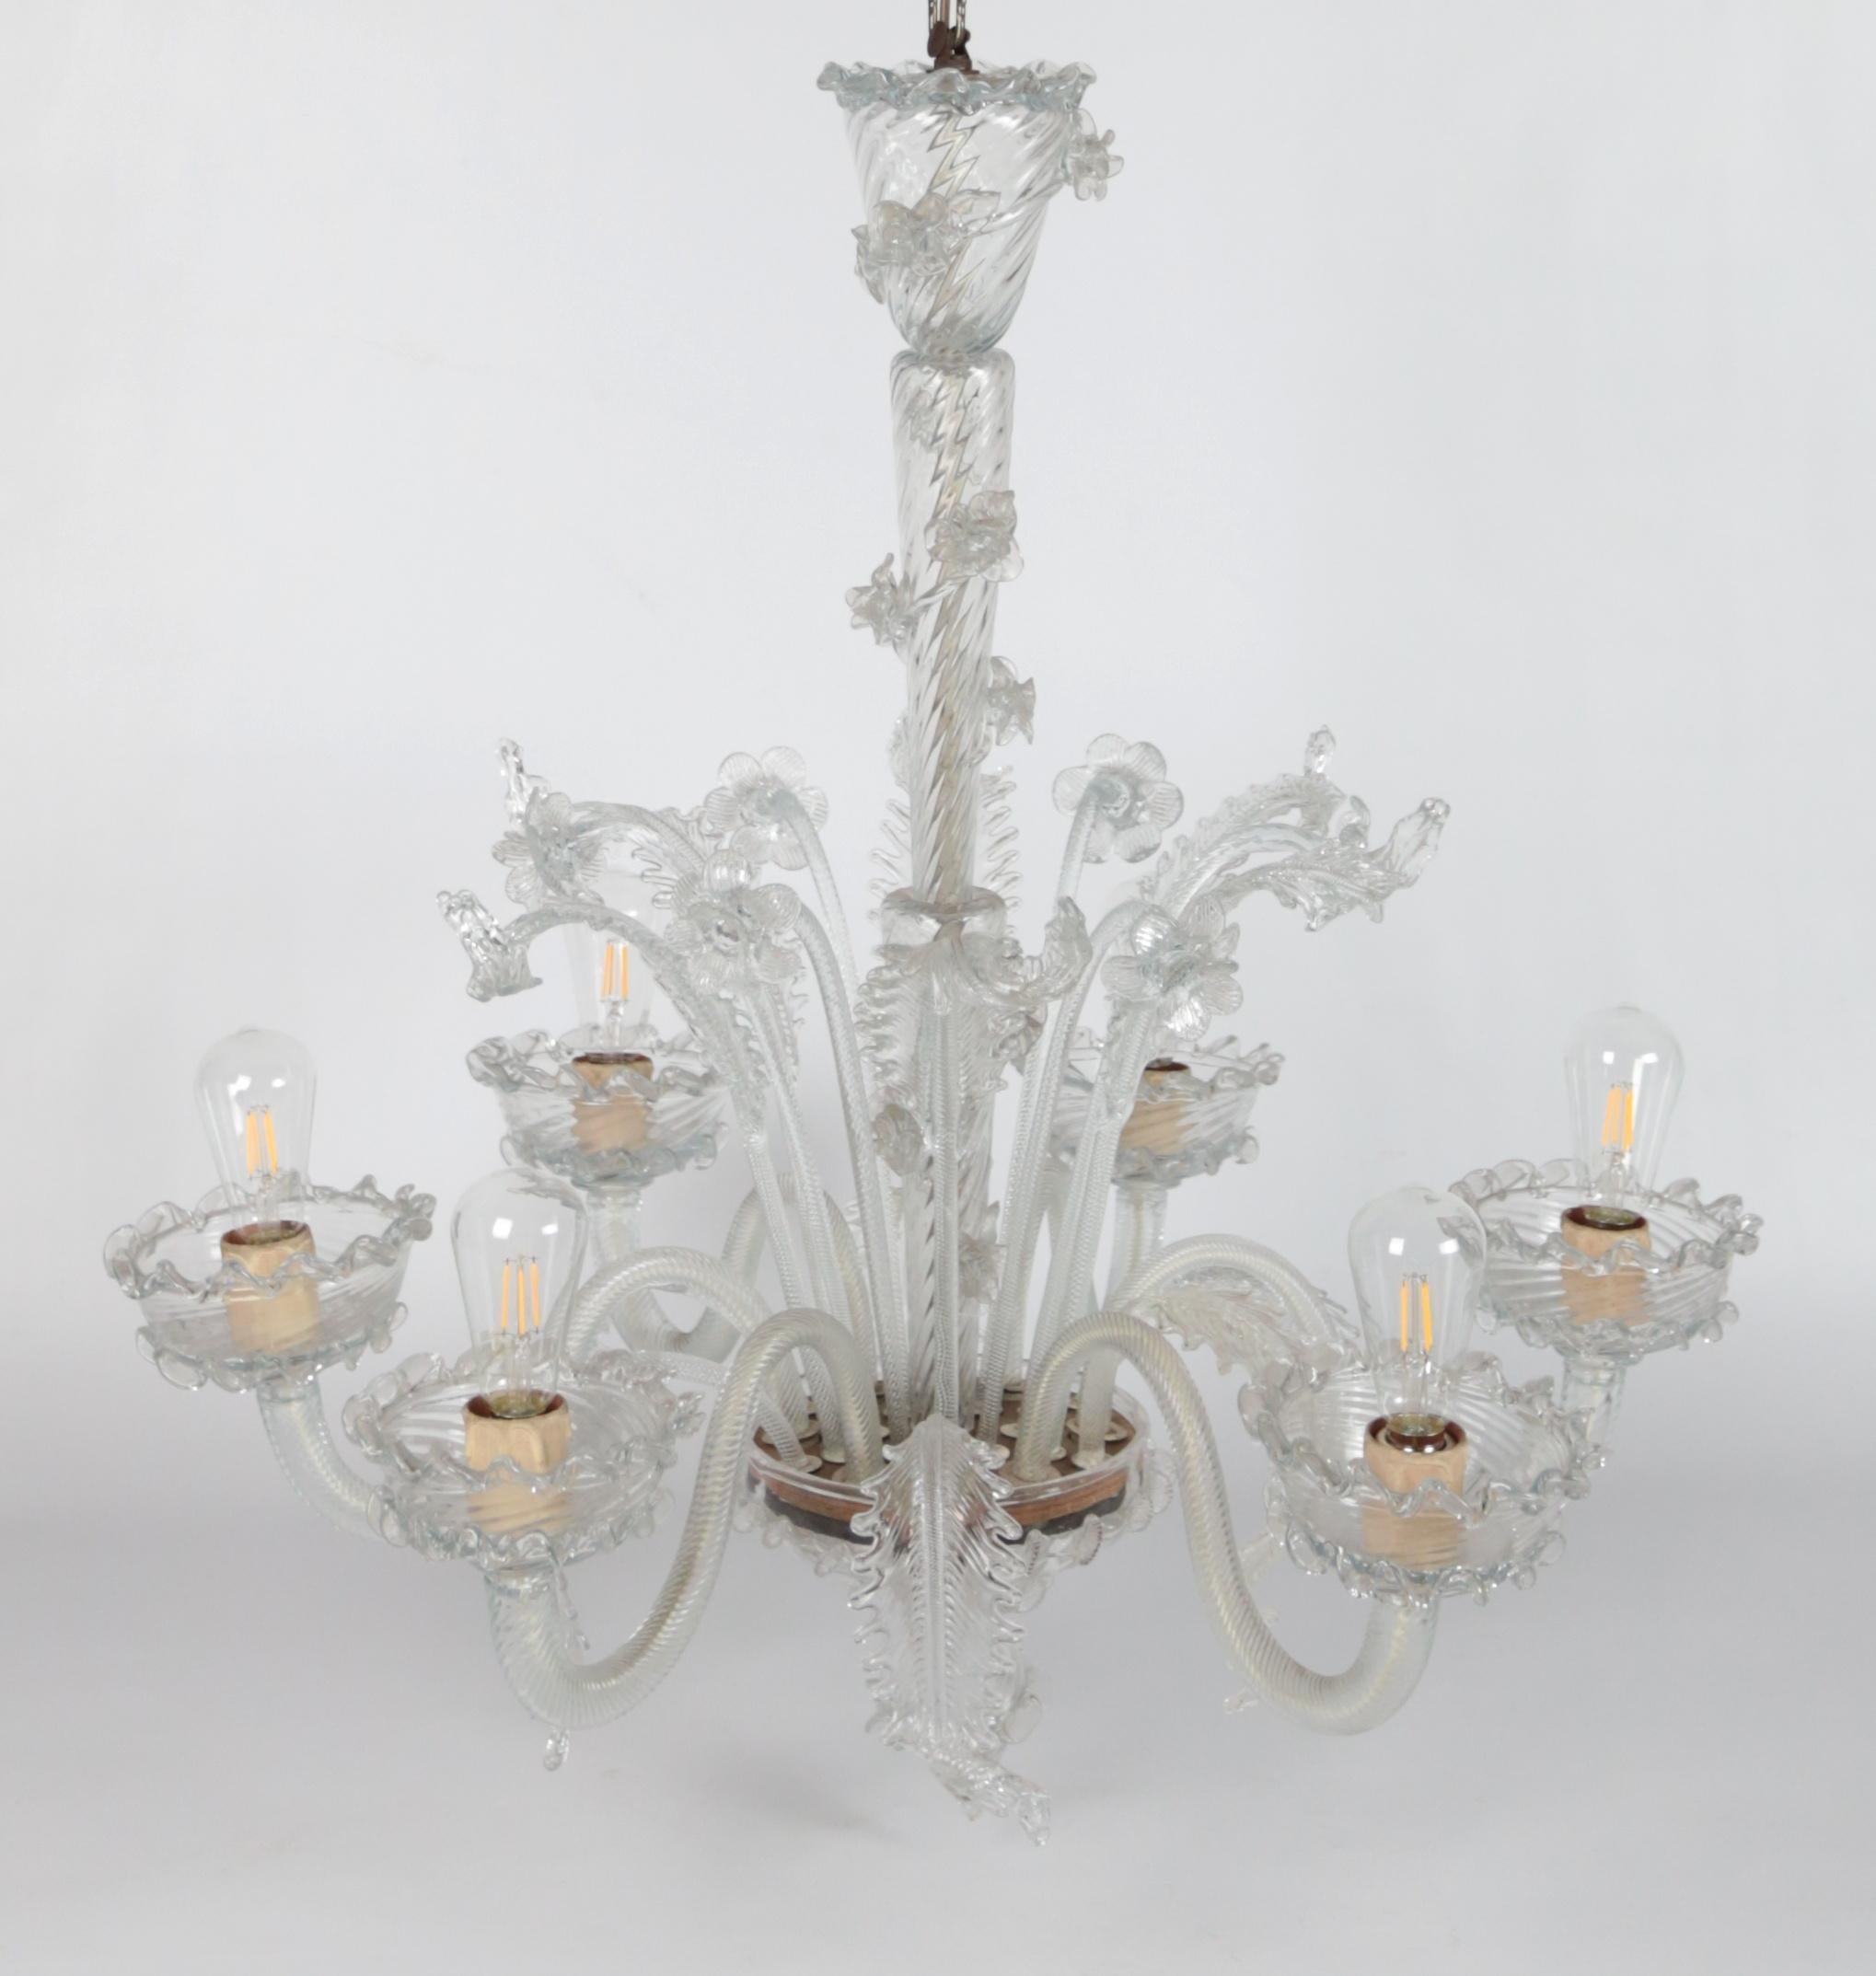 Six-arm Venetian Murano chandelier. Restored

Beautiful Venetian Murano chandelier with floral decoration. The chandelier has new wiring and a new power cable. Very good condition with no broken pieces. The chandelier is made of hand-cut glass.